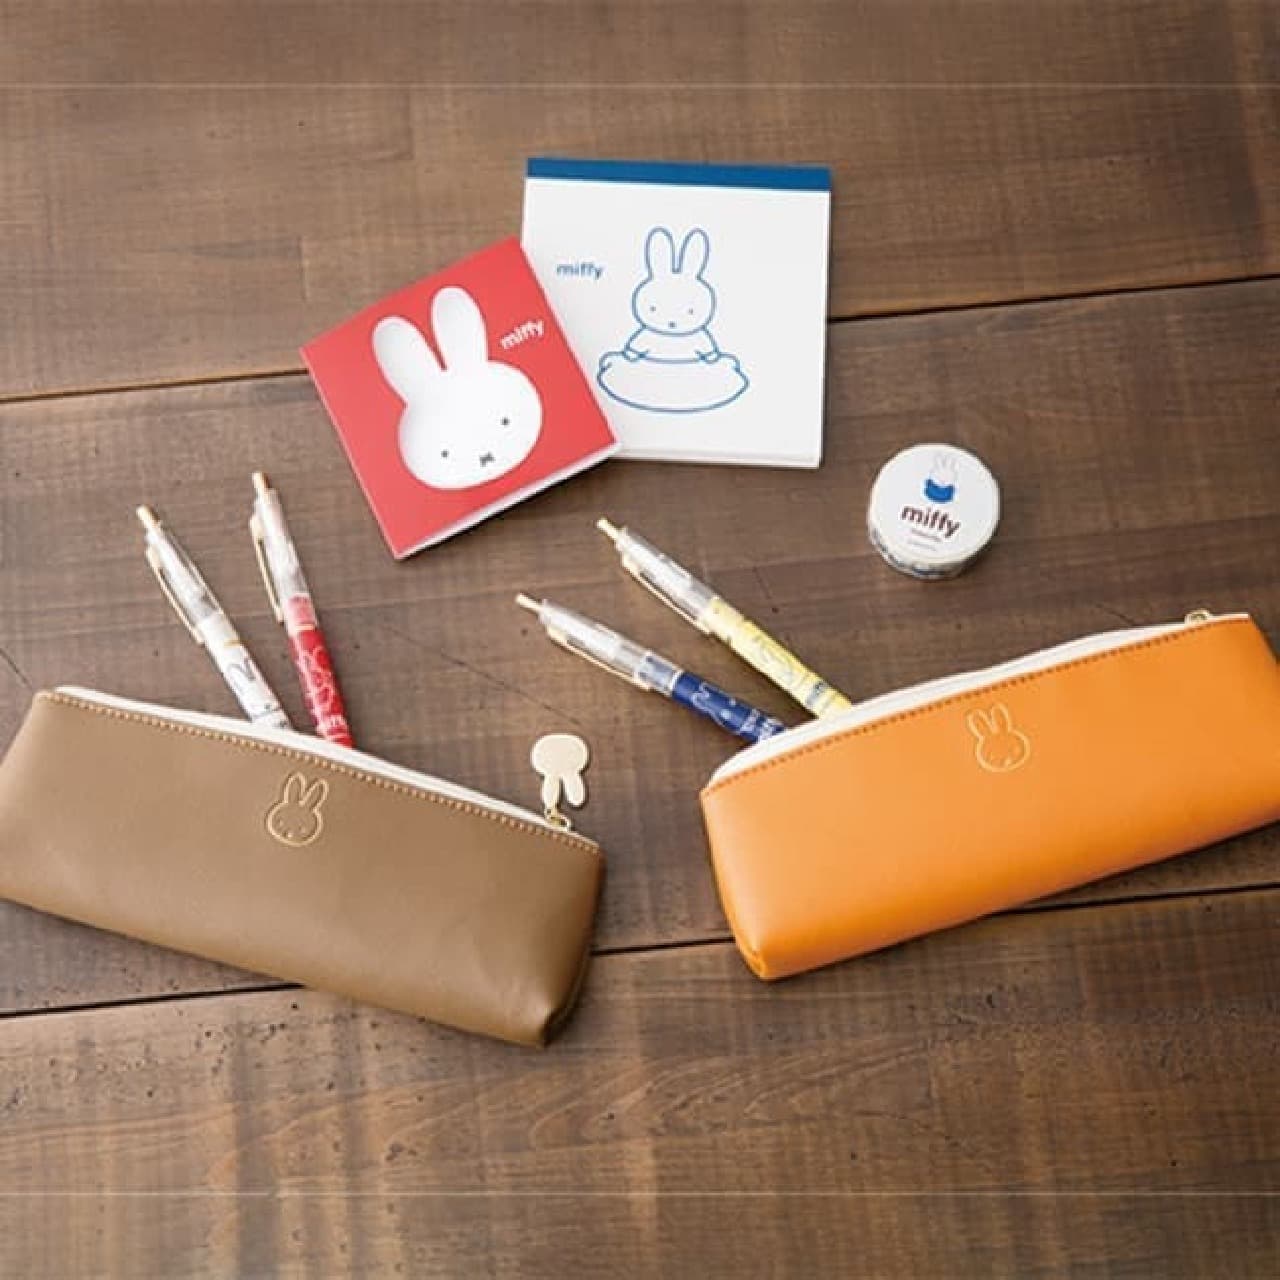 Miffy pattern stationery in Villevan --30 points such as pen pouch and maste